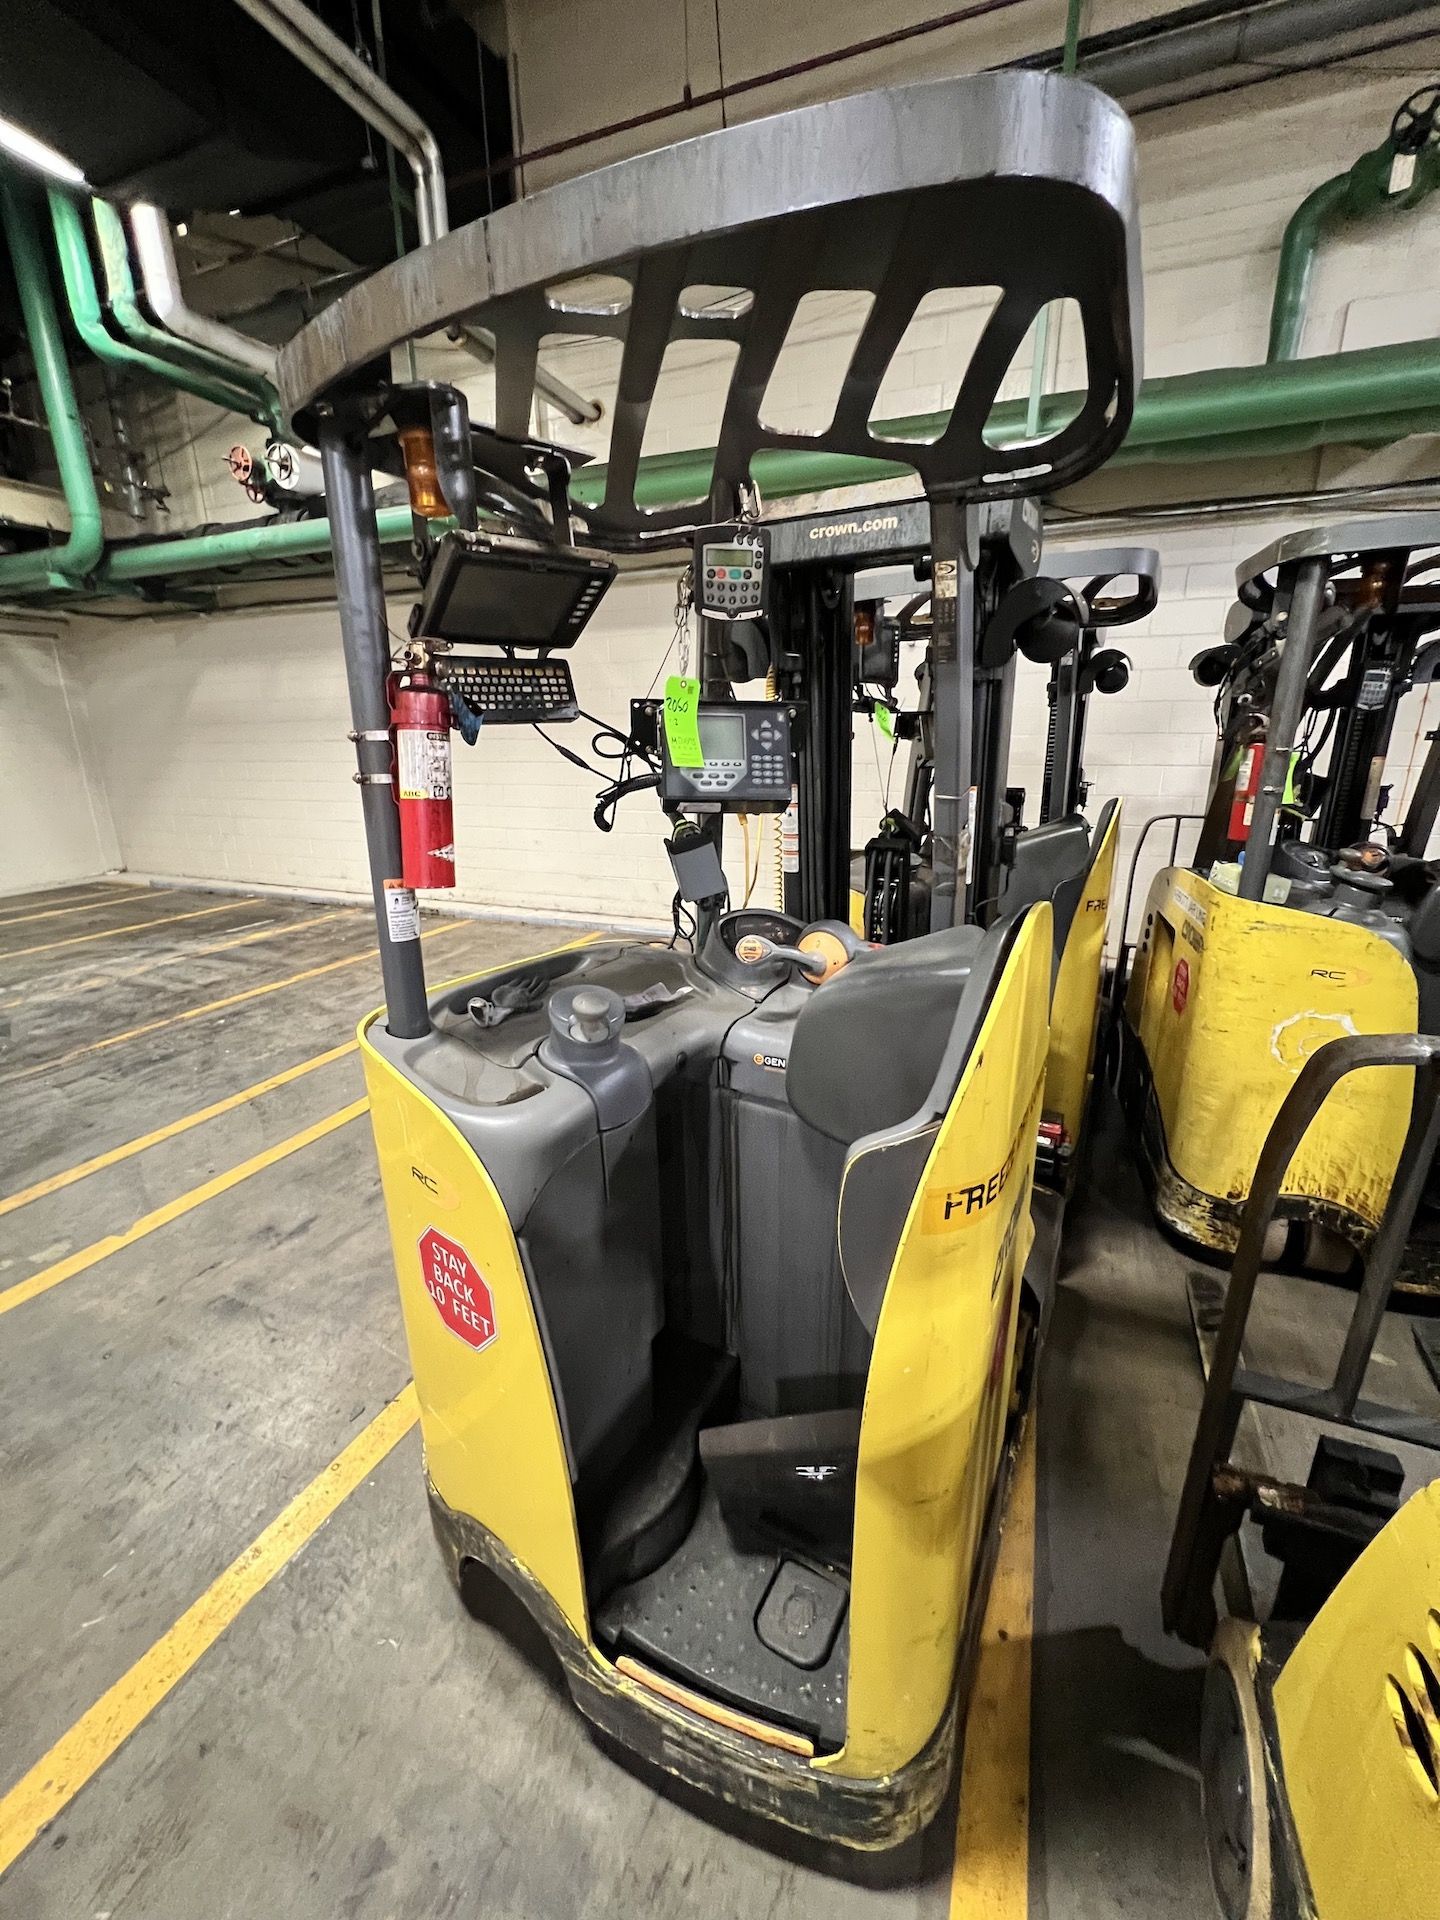 (2) CROWN STANDUP NARROW AISLE FORKLIFTS, MODEL RC5515-30, BATTERIES NOT INCLUDED - Image 2 of 16